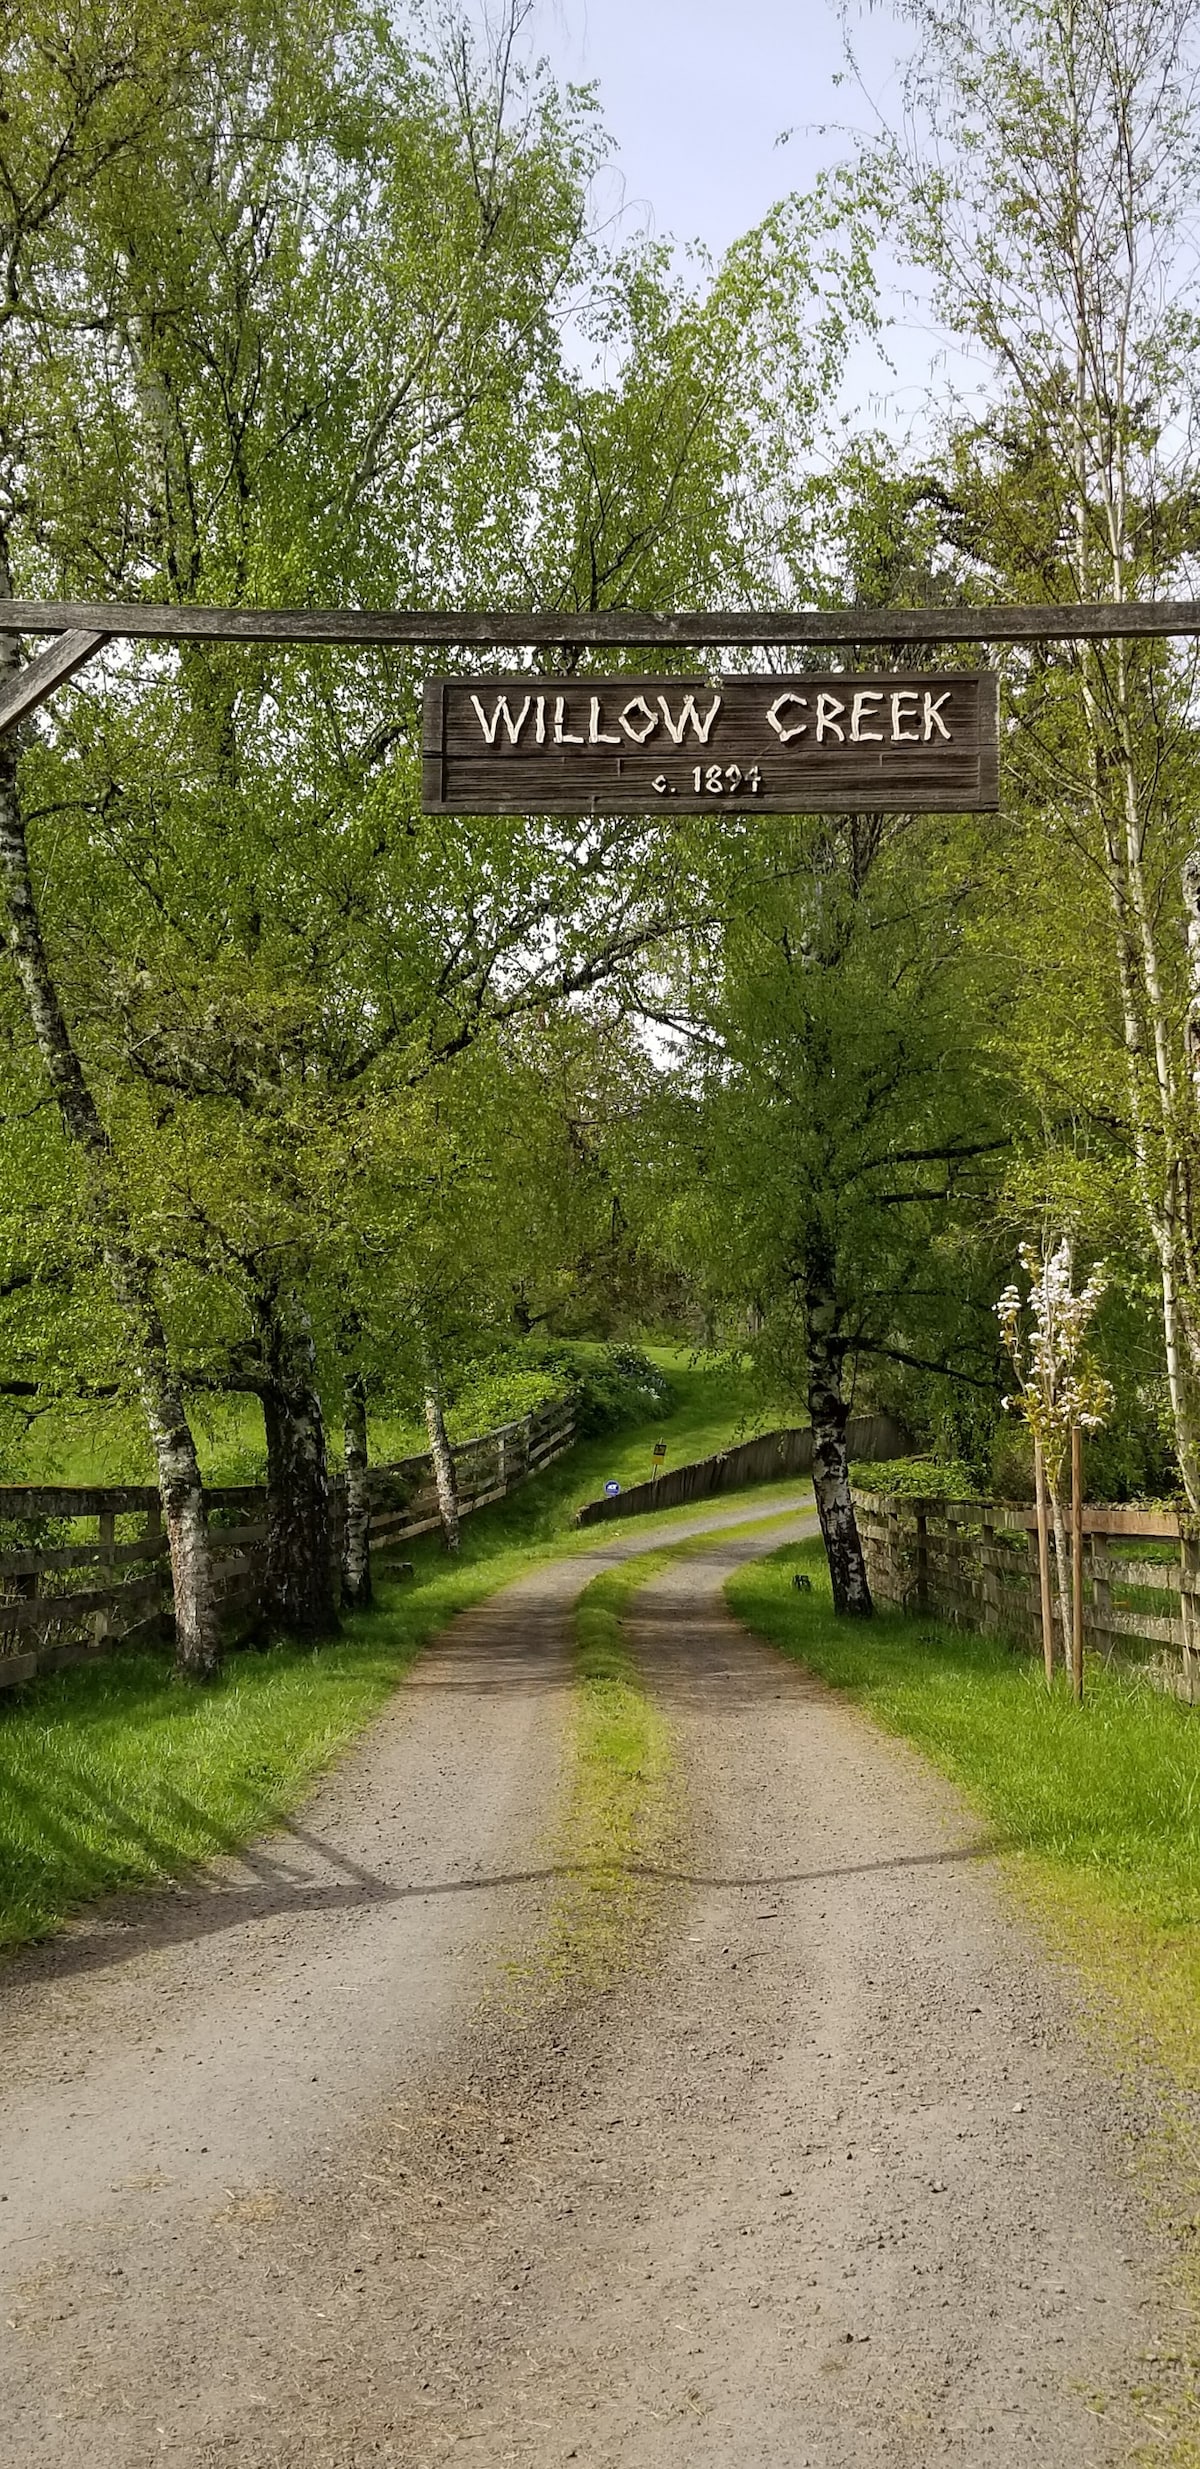 Willow Creek Cottage